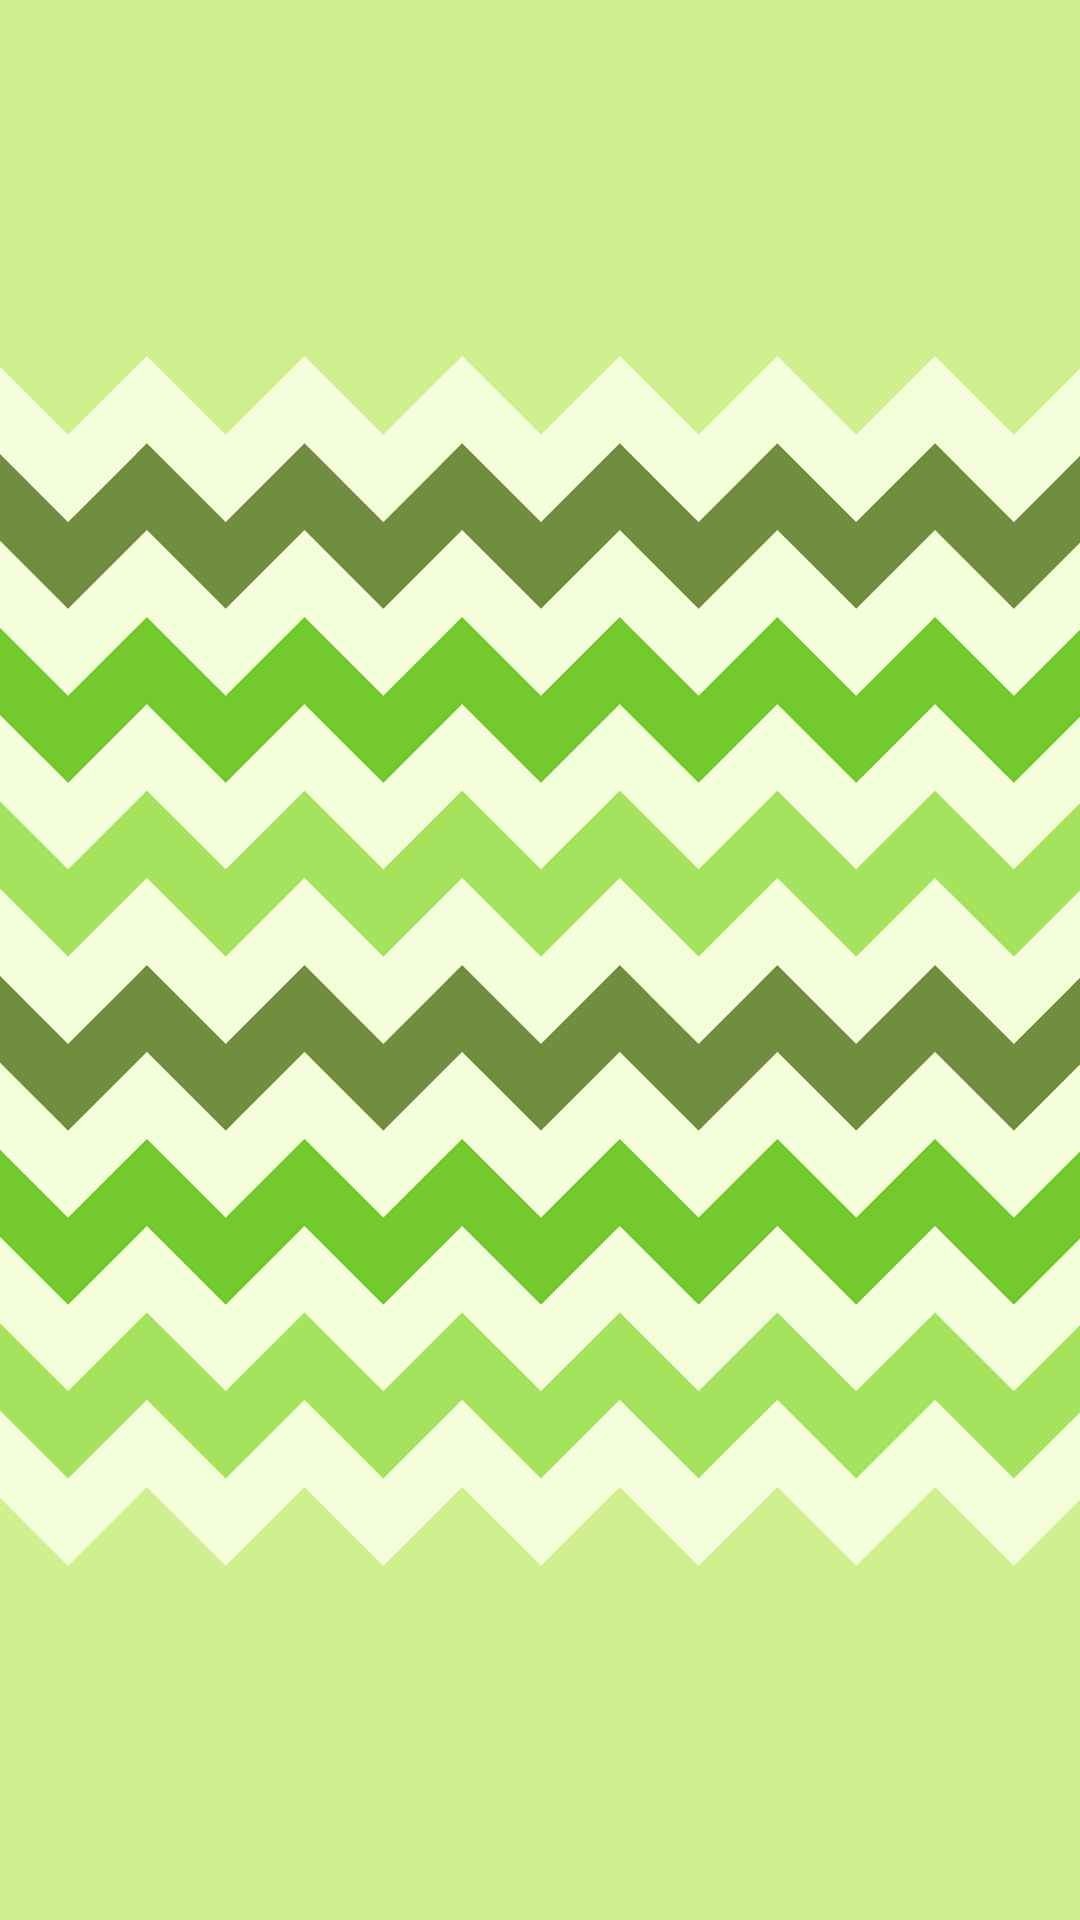 1080x1920 Ombre Green Chevron and Zigzag iPhone 6 Plus Wallpaper - Light Green  Background #iPhone #